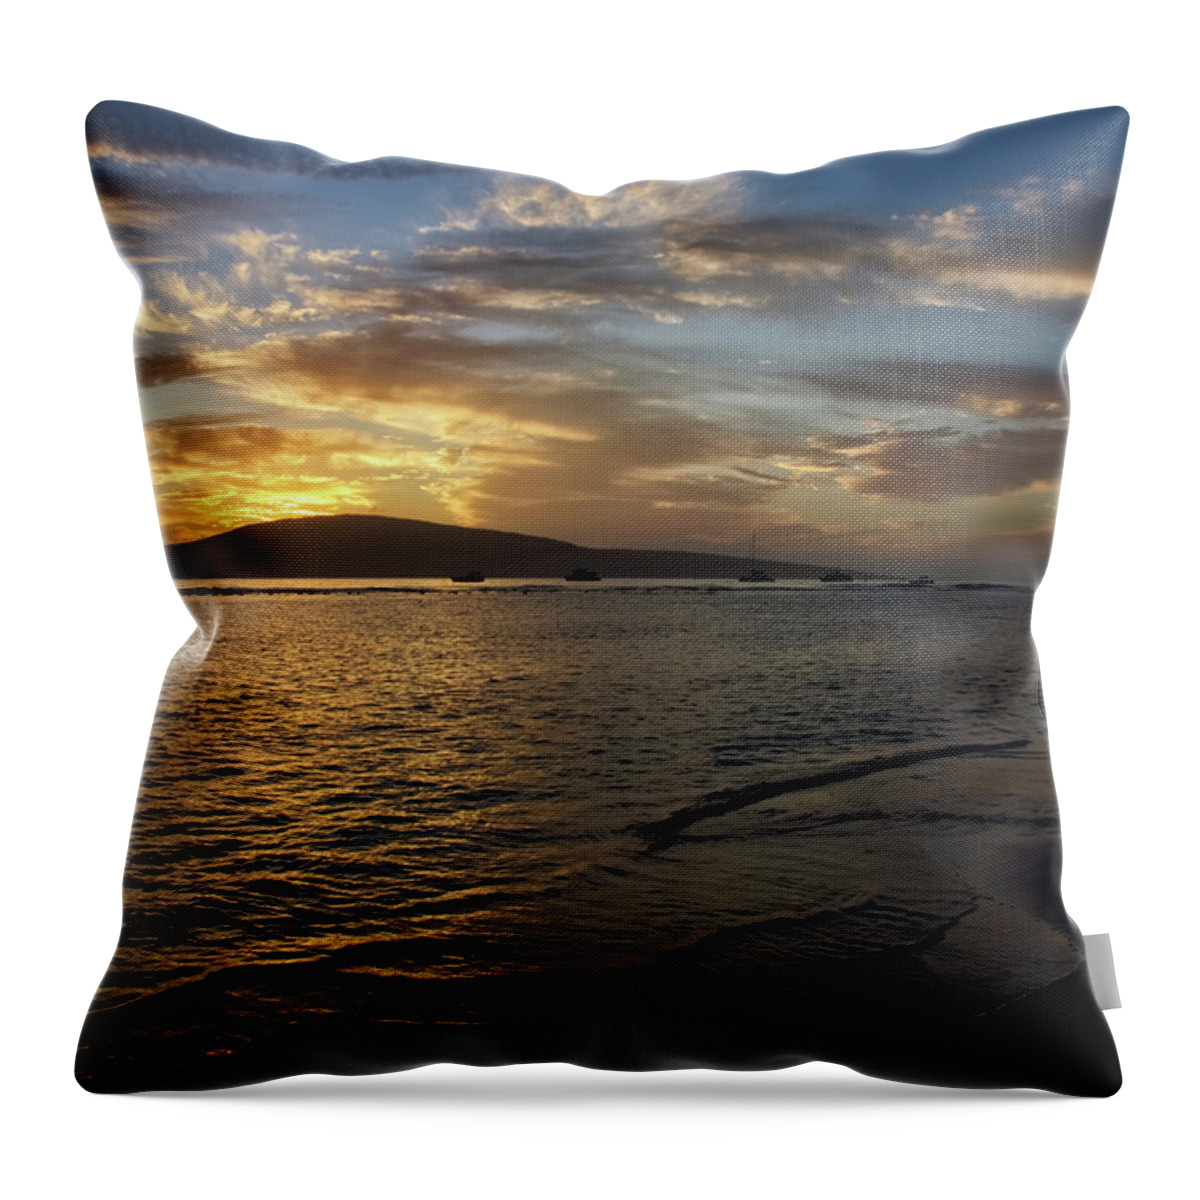 Boat Sunset Throw Pillow featuring the photograph Boat Sunset by Steven Michael